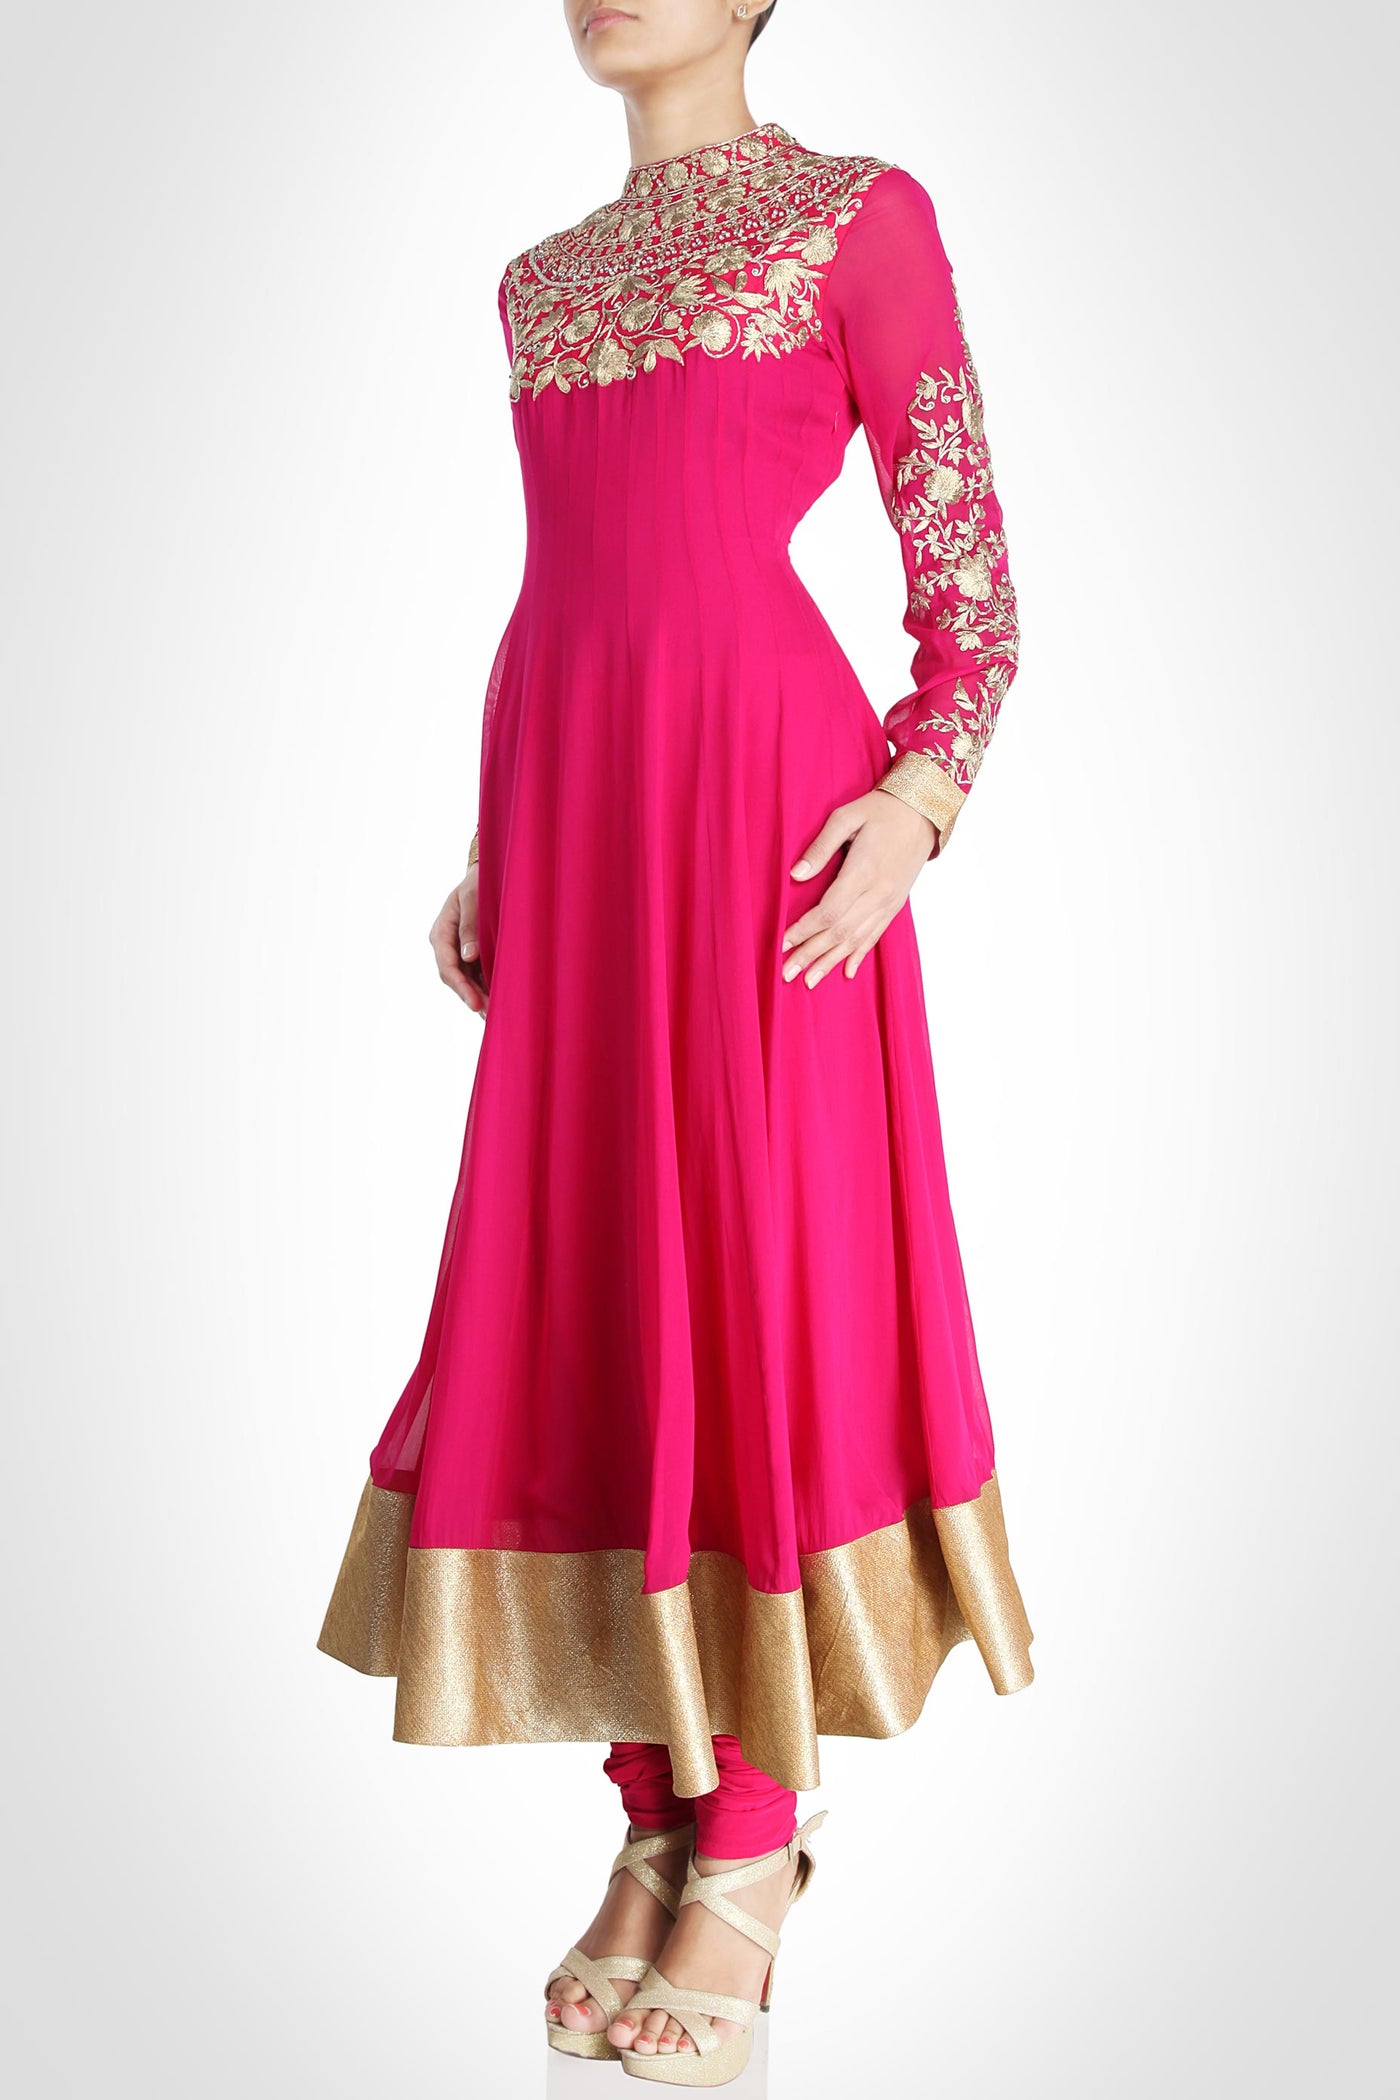 GOTA SAINI ANARKALI COLLECTION: PINK - Indian Clothing in Denver, CO, Aurora, CO, Boulder, CO, Fort Collins, CO, Colorado Springs, CO, Parker, CO, Highlands Ranch, CO, Cherry Creek, CO, Centennial, CO, and Longmont, CO. Nationwide shipping USA - India Fashion X